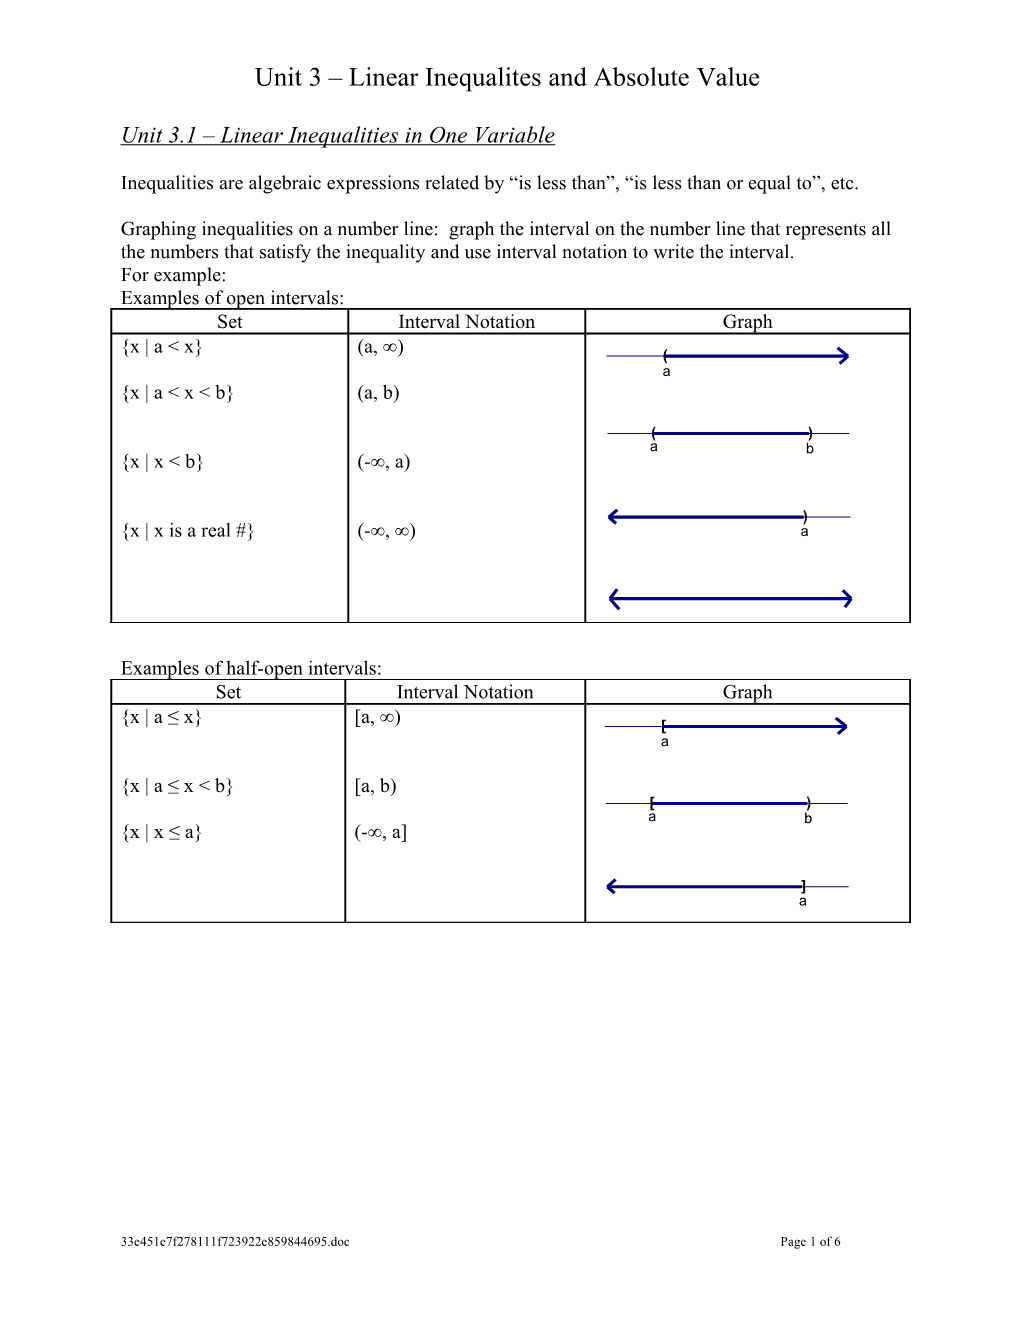 Inequalities Are Algebraic Expressions Related by Is Less Than , Is Less Than Or Equal to , Etc